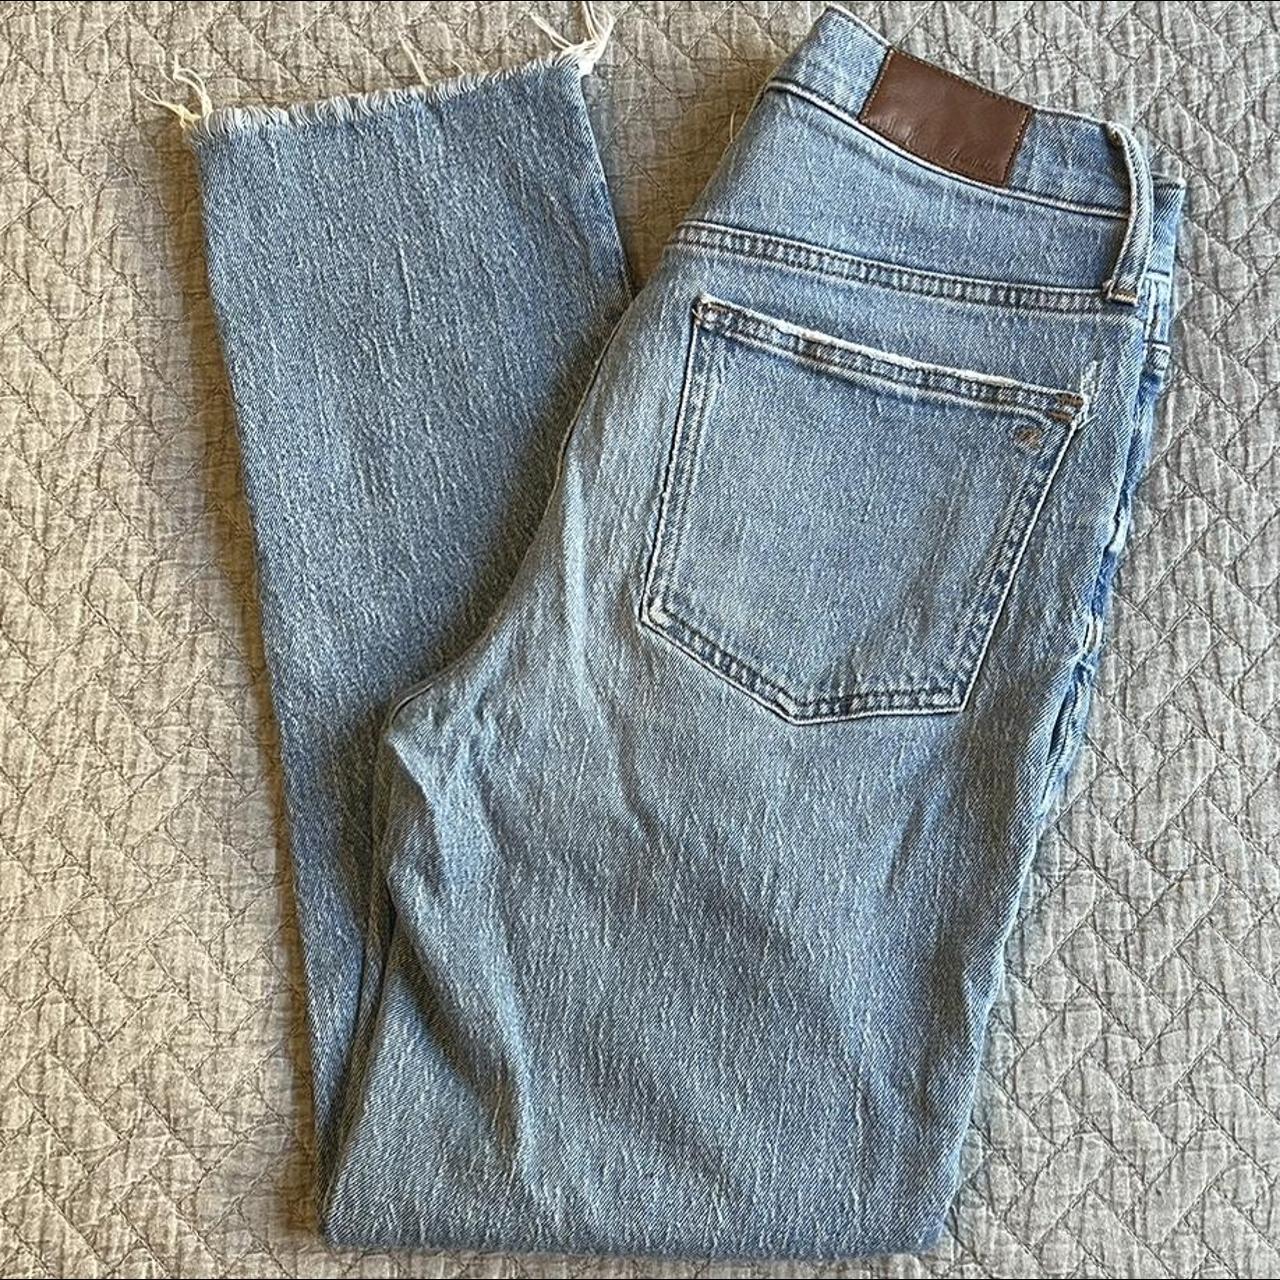 Light wash “the perfect vintage jean” by Madewell.... - Depop